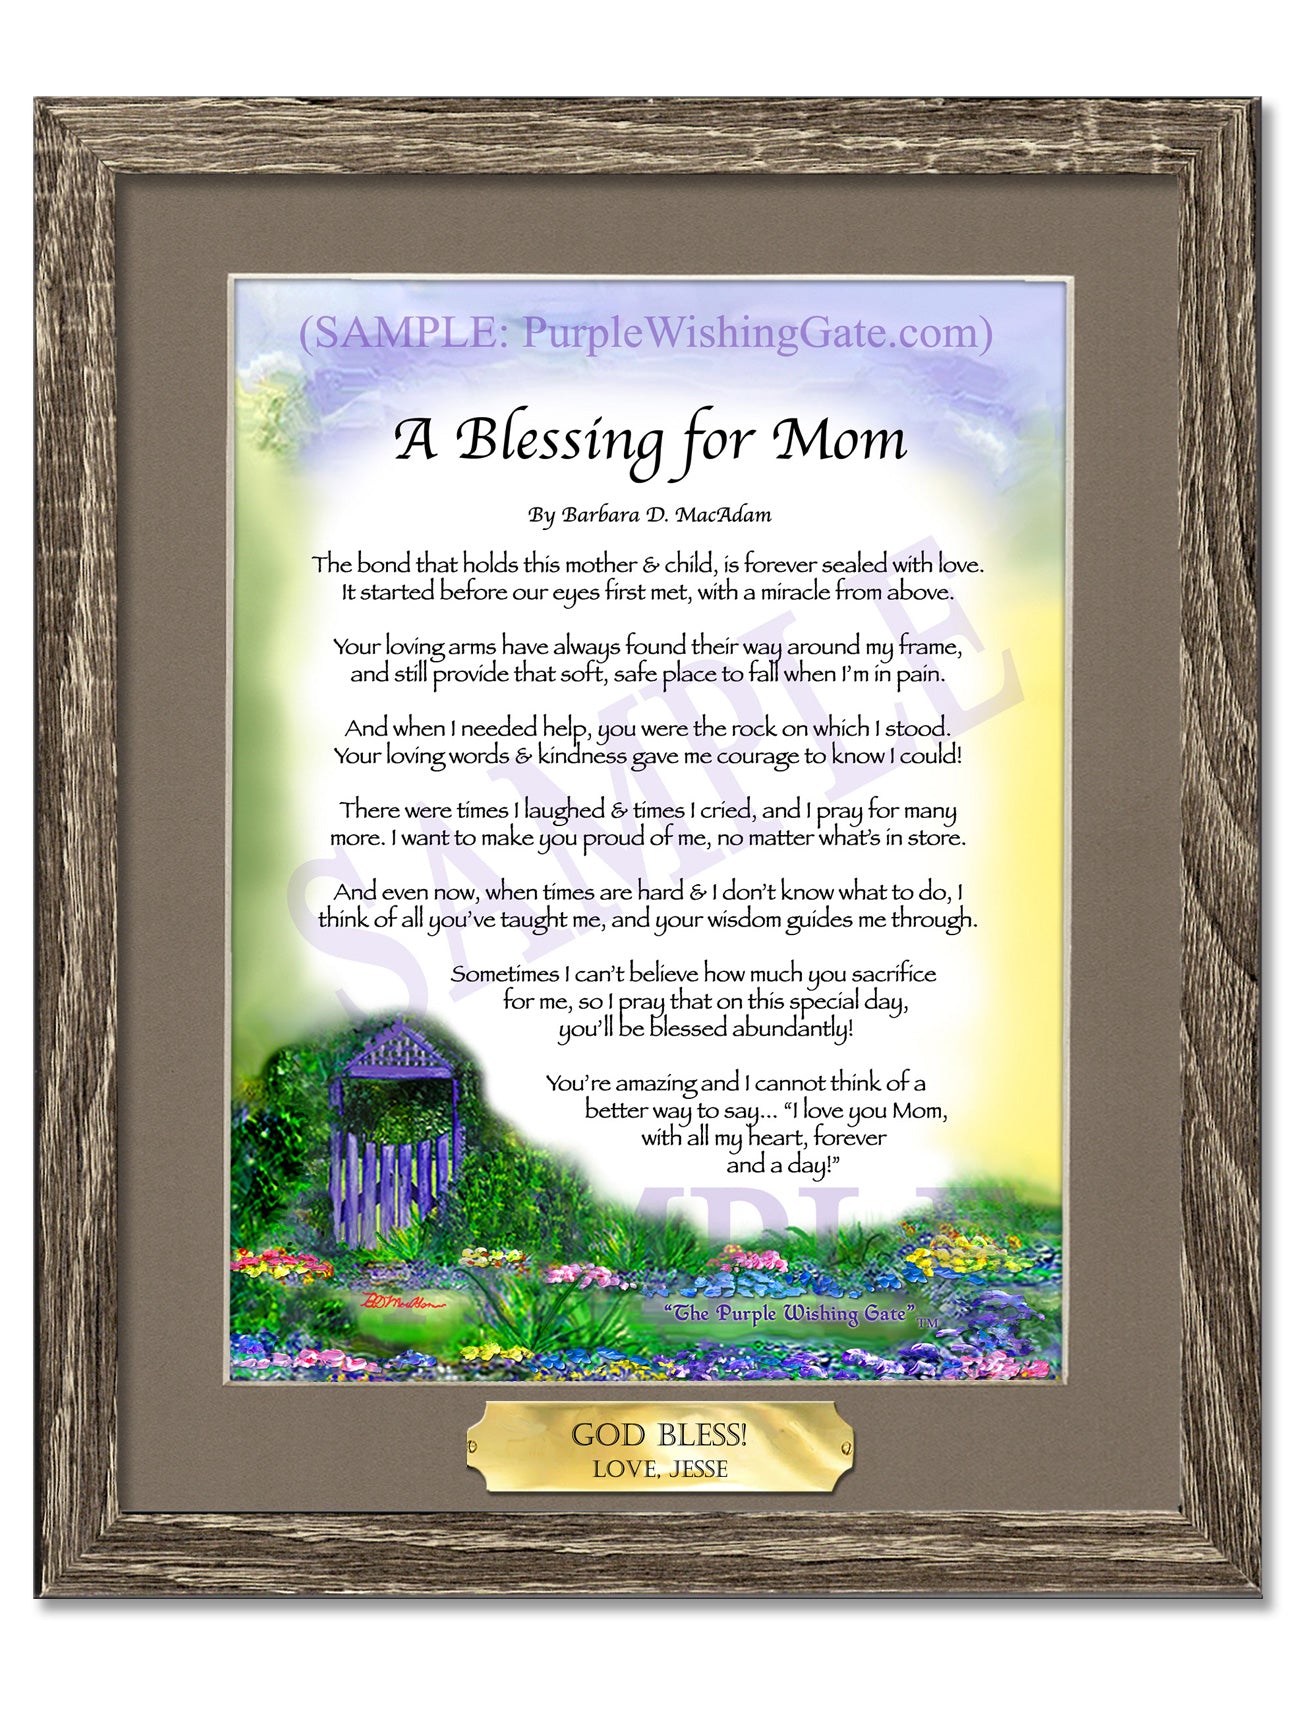 A Blessing for My Mom: Personalized, Framed Gift!